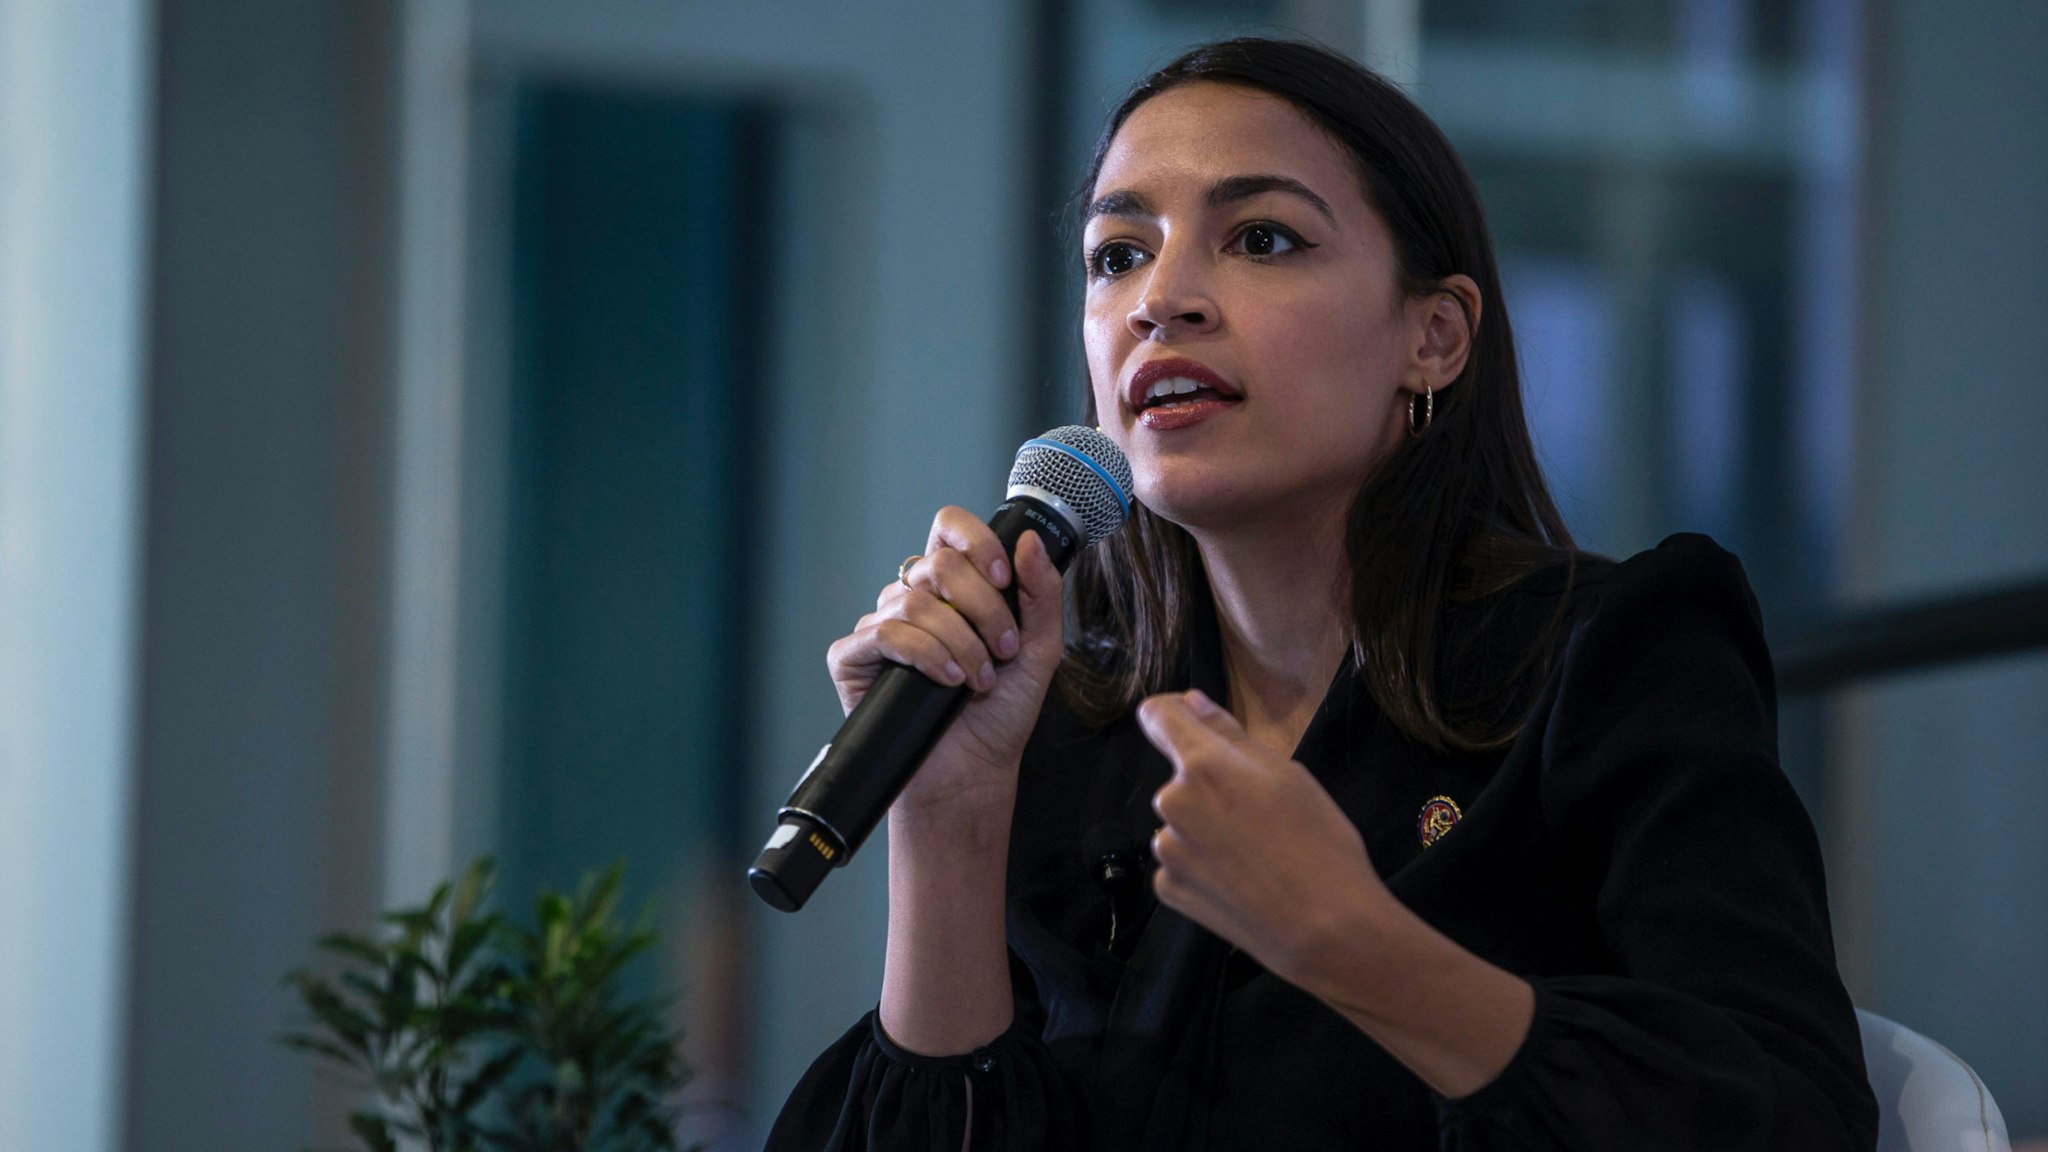 Rep. Alexandria Ocasio-Cortez (D-NY) speaks during a town hall hosted by the NAACP on September 11, 2019 in Washington, DC.